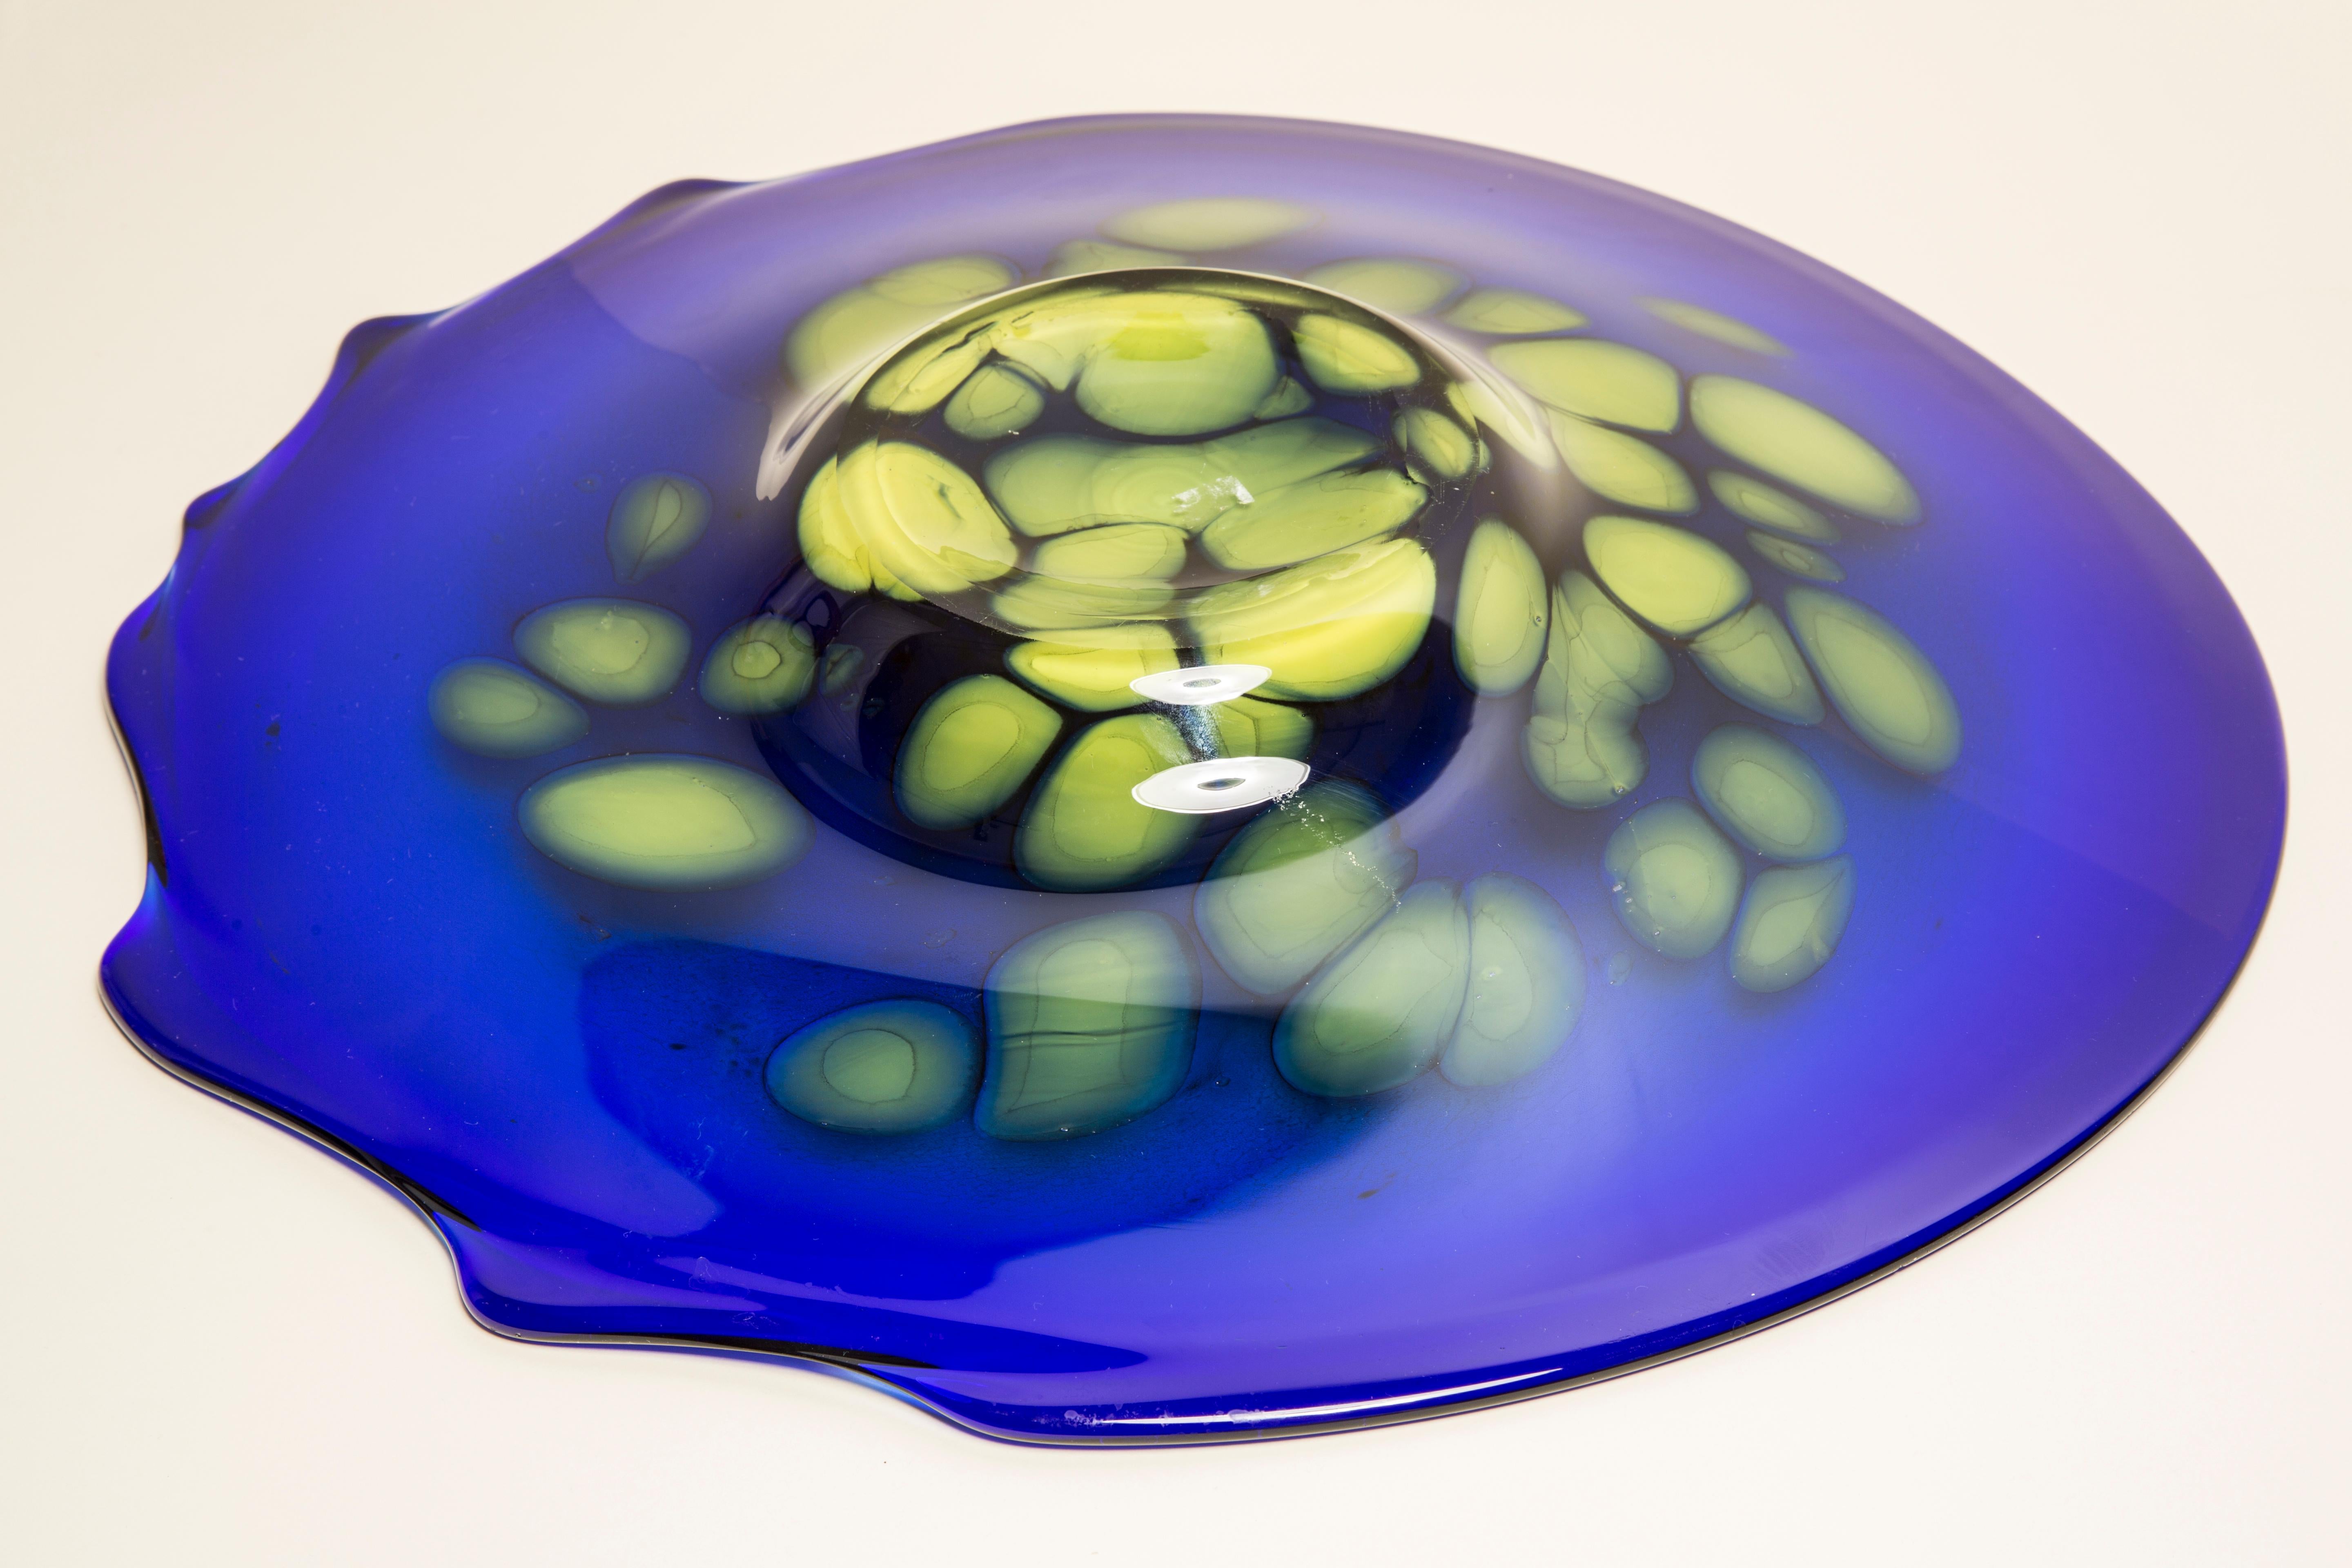 Midcentury Vintage Blue and Yellow Decorative Murano Plate, Italy, 1960s For Sale 7